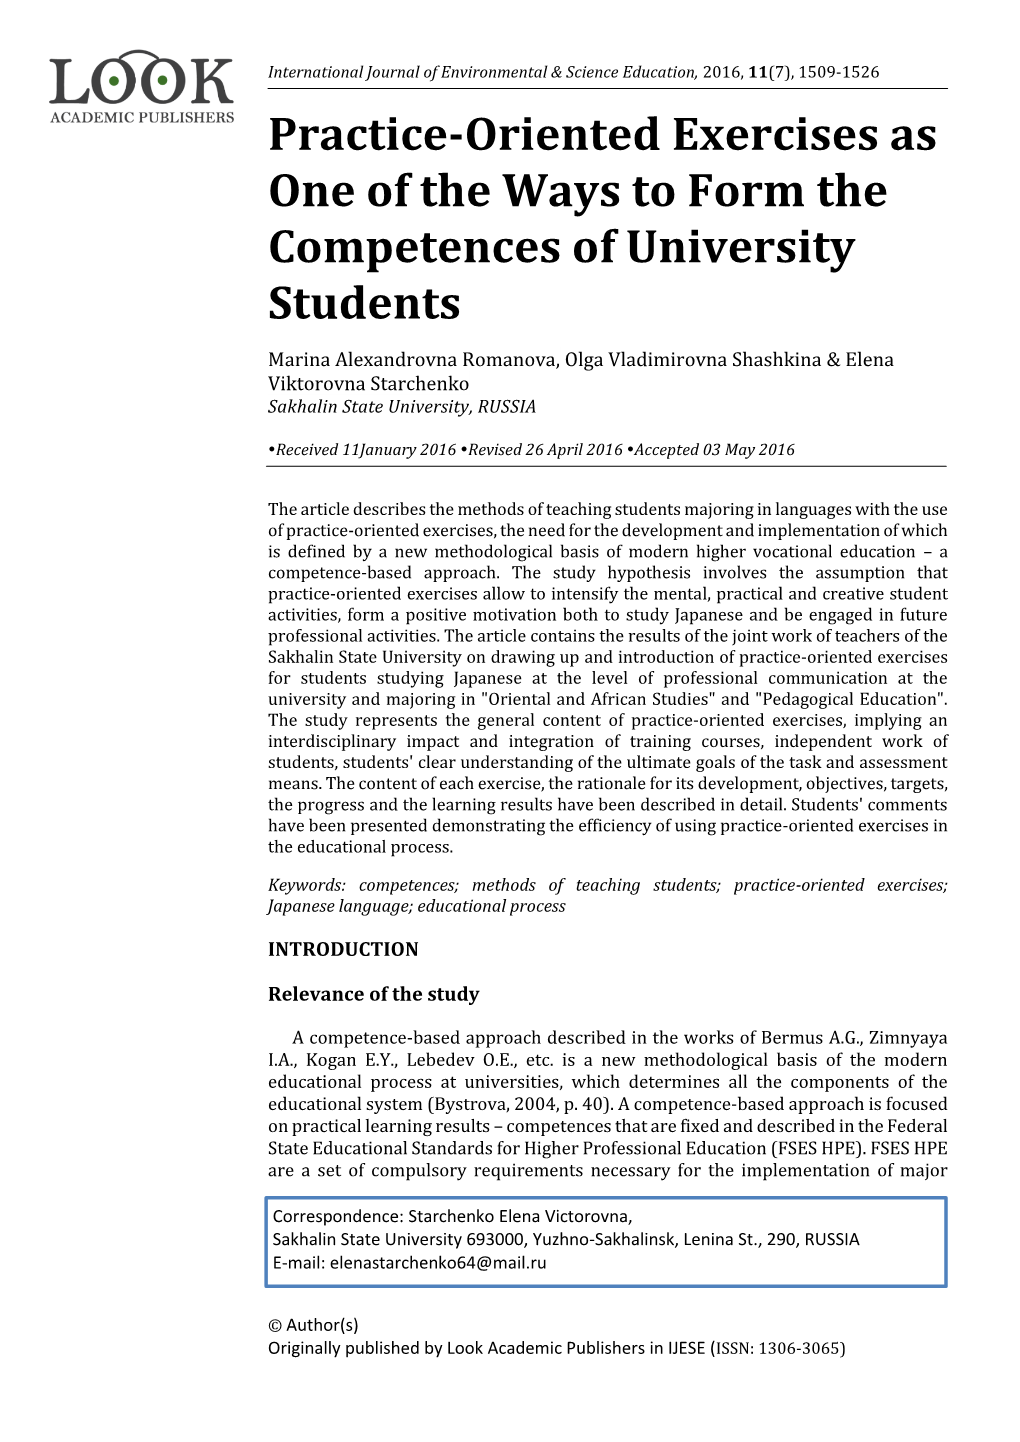 Practice-Oriented Exercises As One of the Ways to Form the Competences of University Students